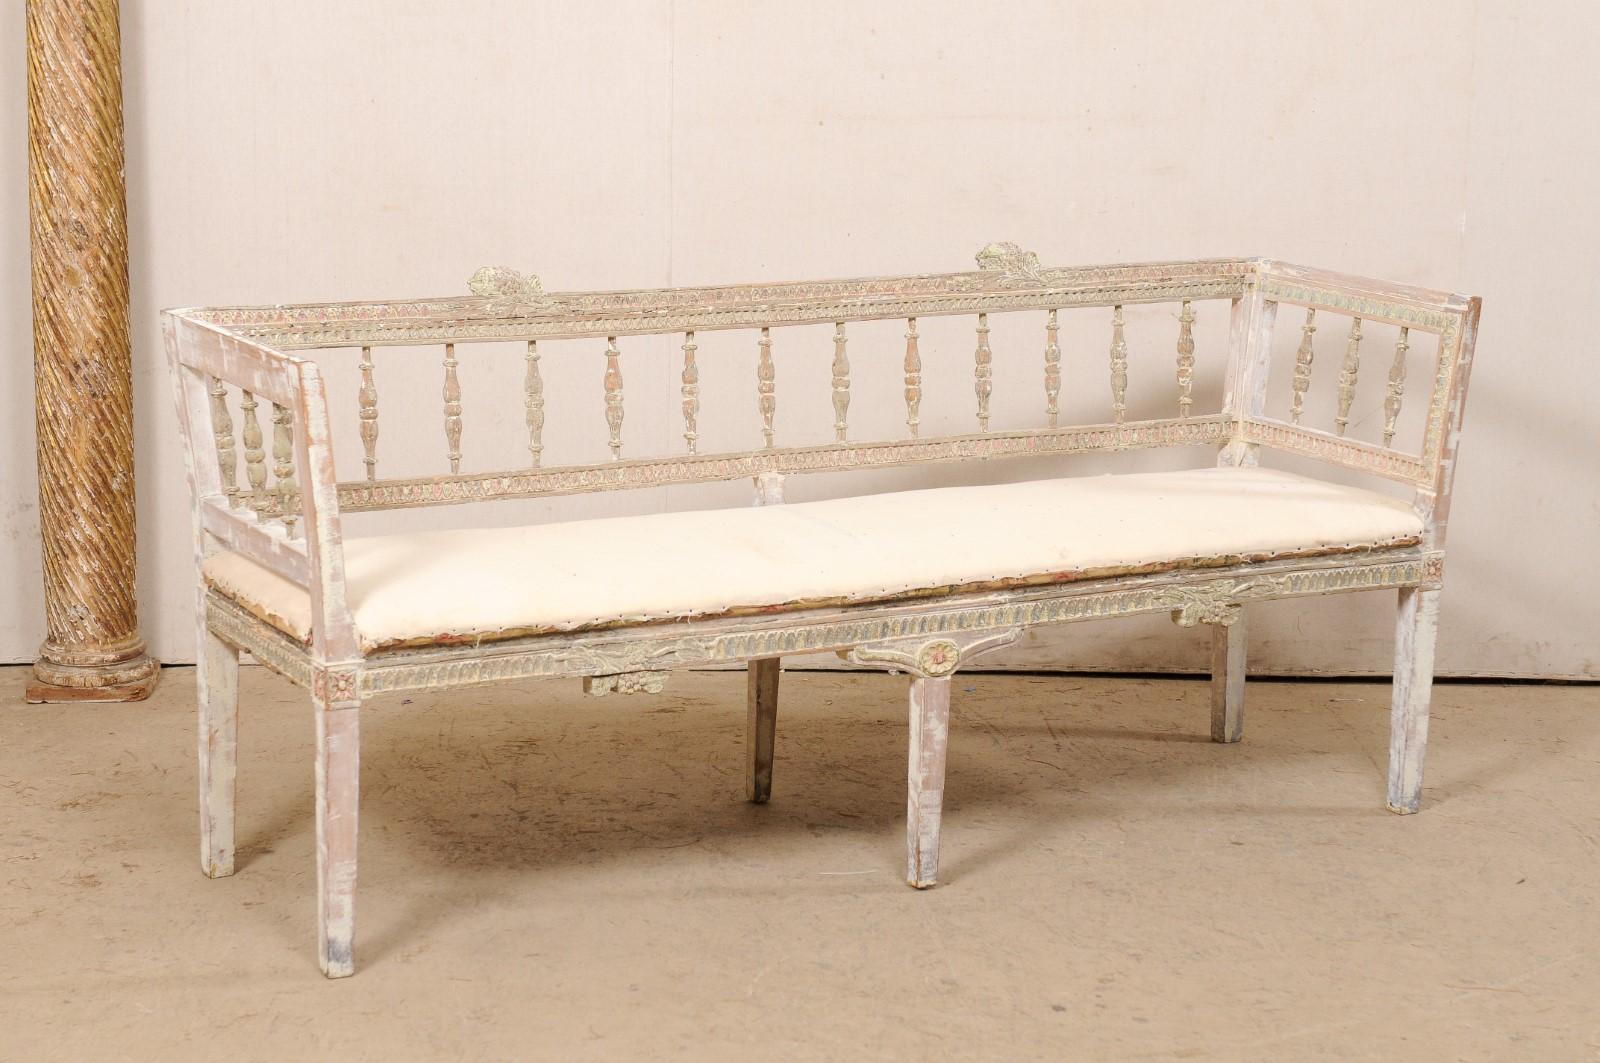 A Swedish Lindome carved-wood sofa bench from the early 19th century. This period Gustavian bench comes from the Lindome region of Sweden; a region known for master craftsman in wood working. Nicely carved spindle back splats are set within a